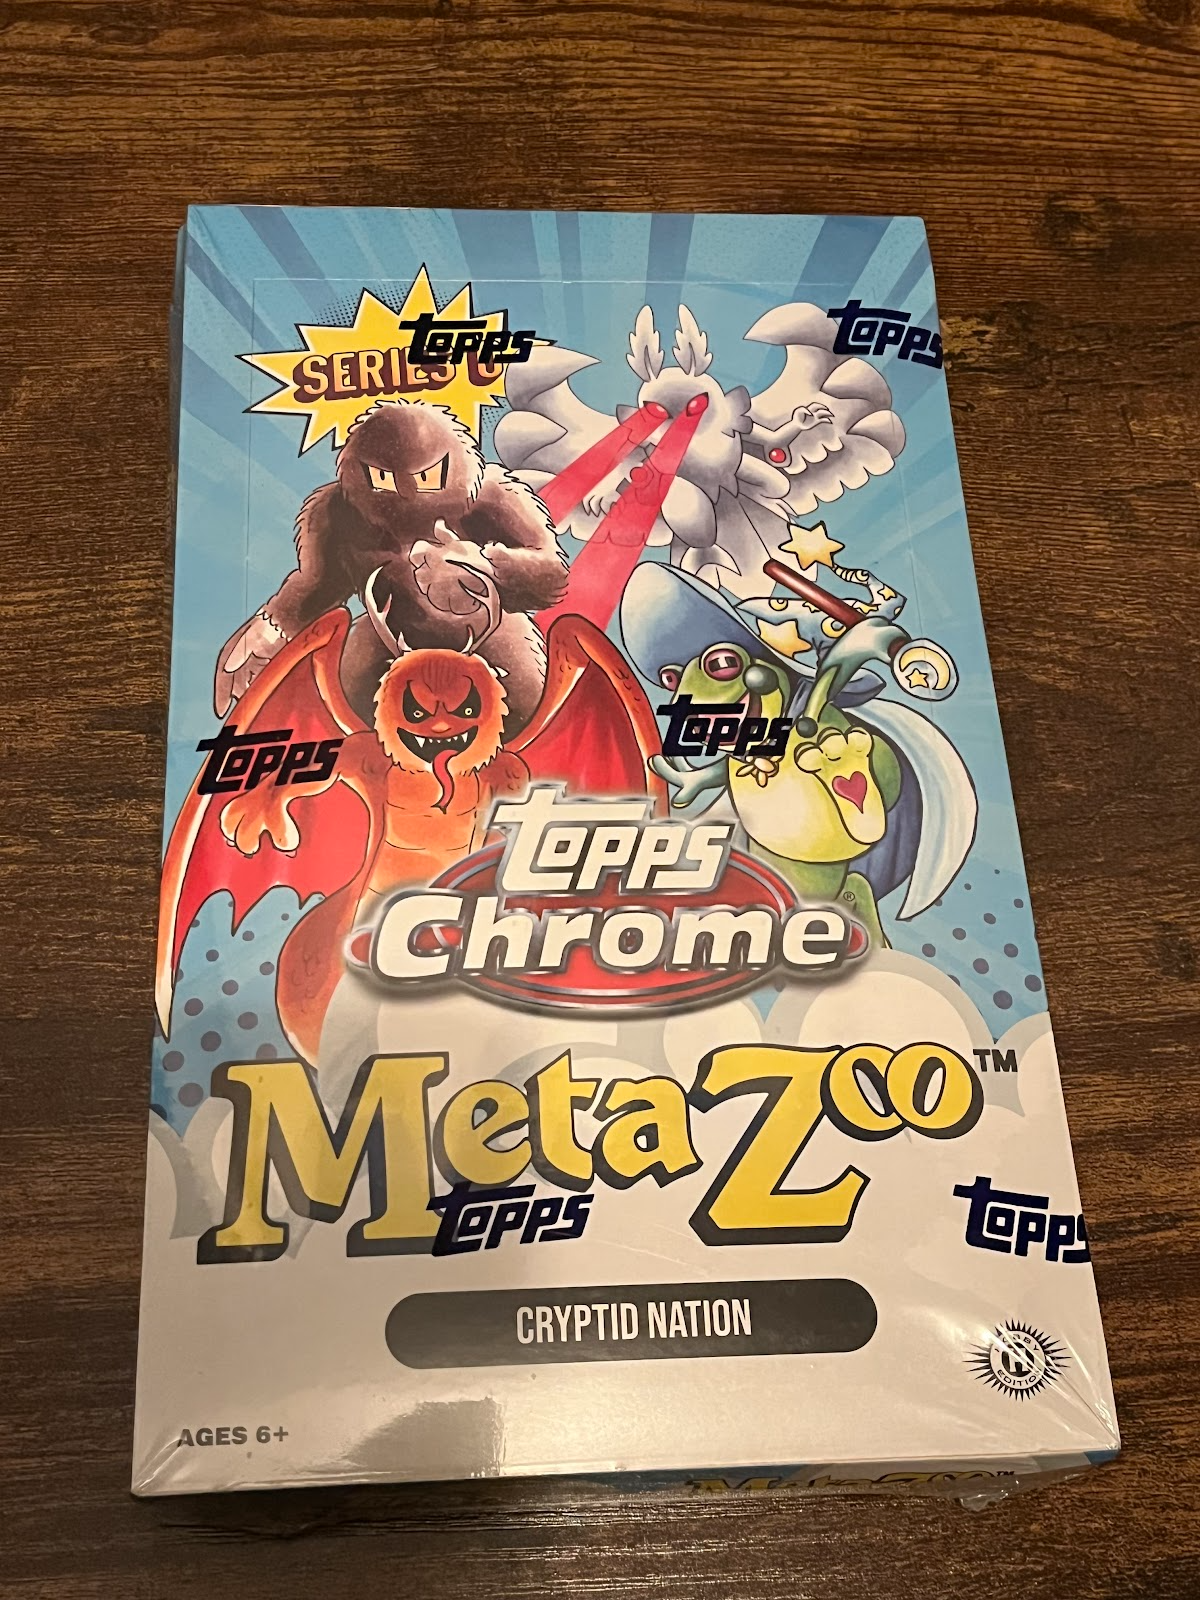 2022 Topps MetaZoo Chrome: Review & Best Cards